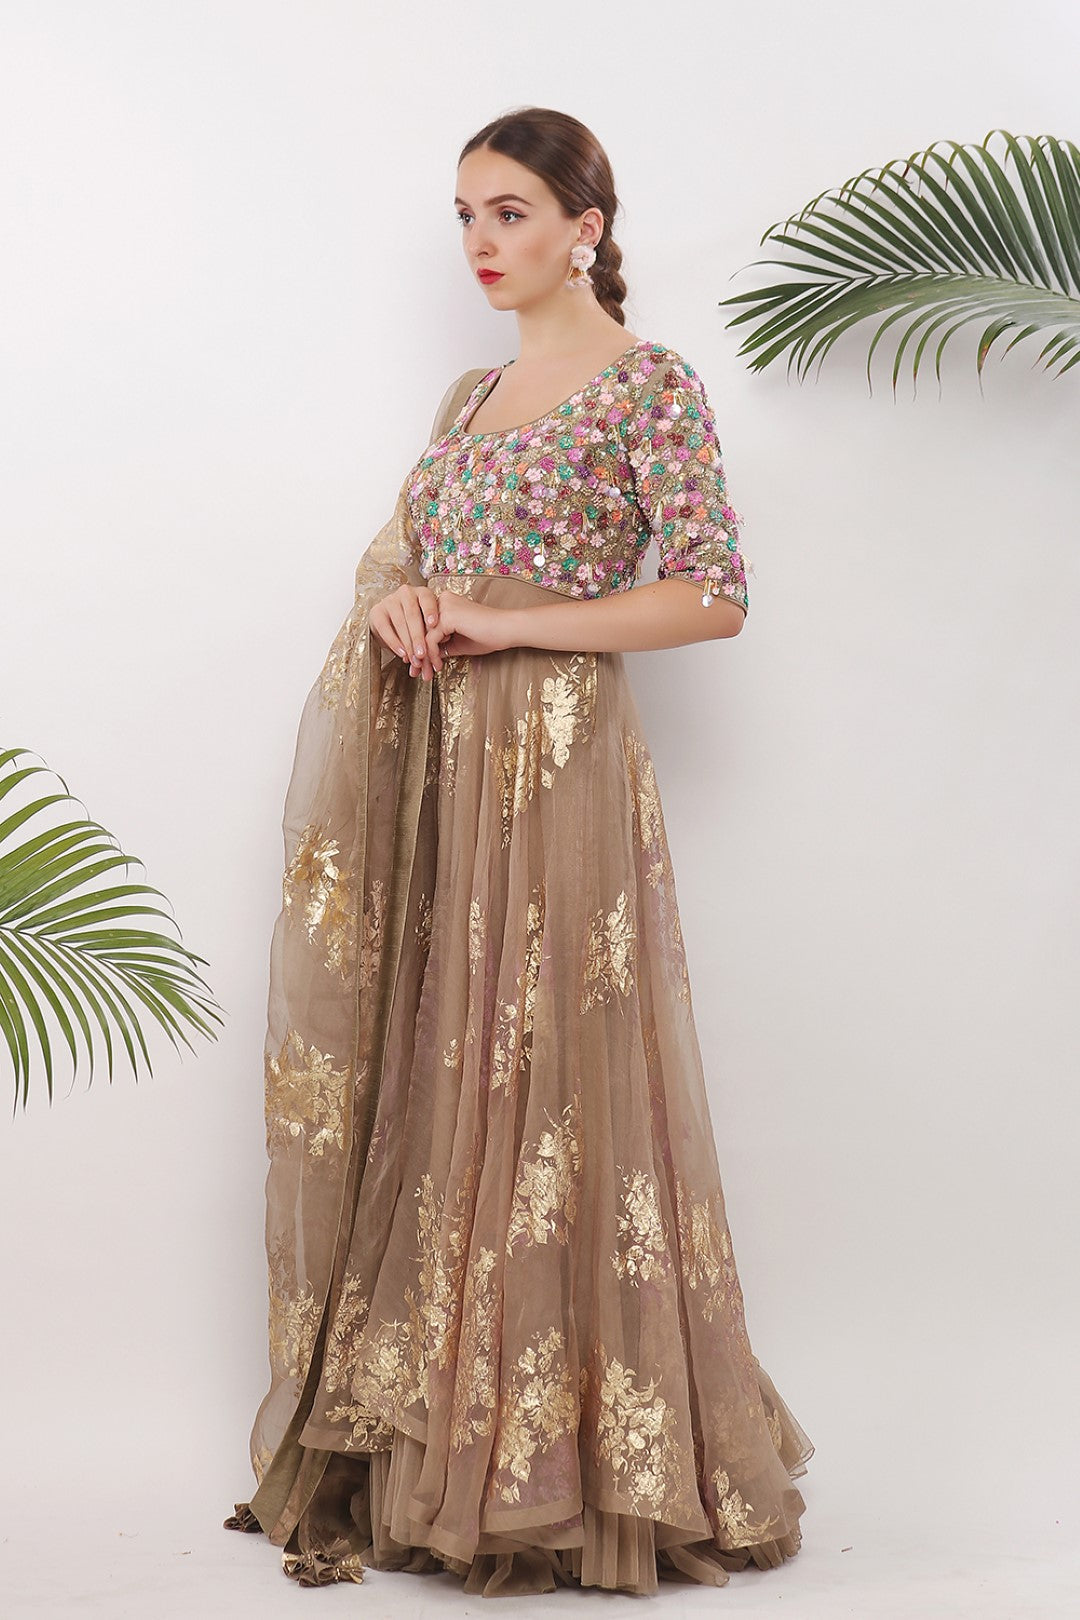 EMBROIDERED YOKE AND GOLD PRINTED GHERA WITH DUPATTA AND CHURIDAAR